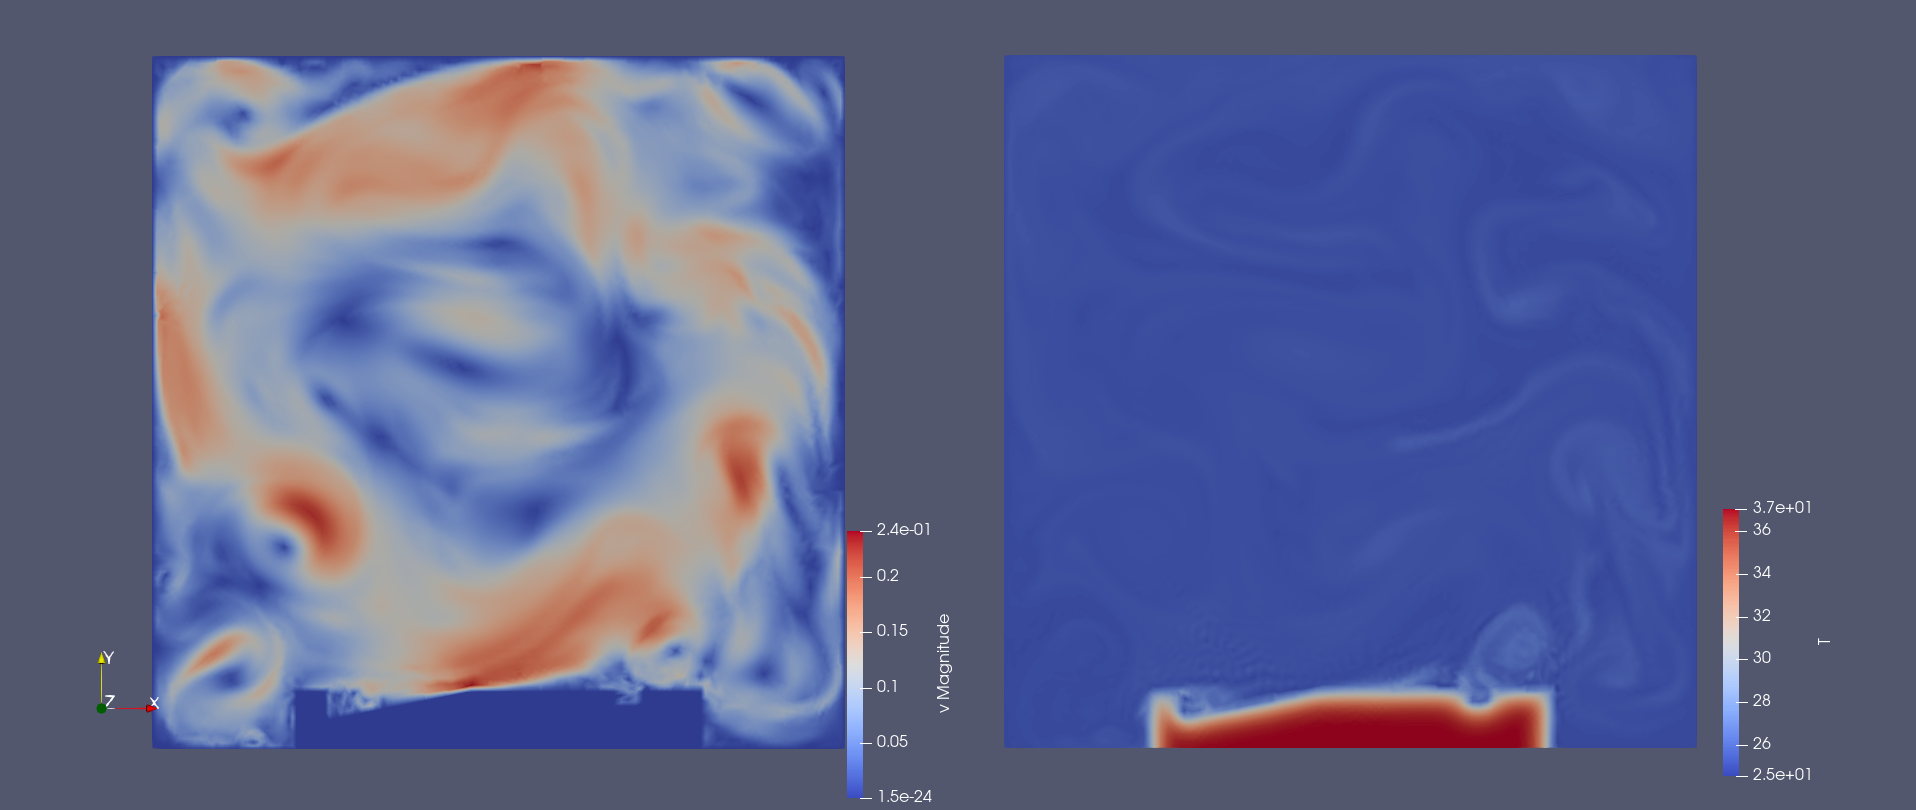 Visualization of 2D simulation results on a lying corpse: flow rate (left), temperature (right)